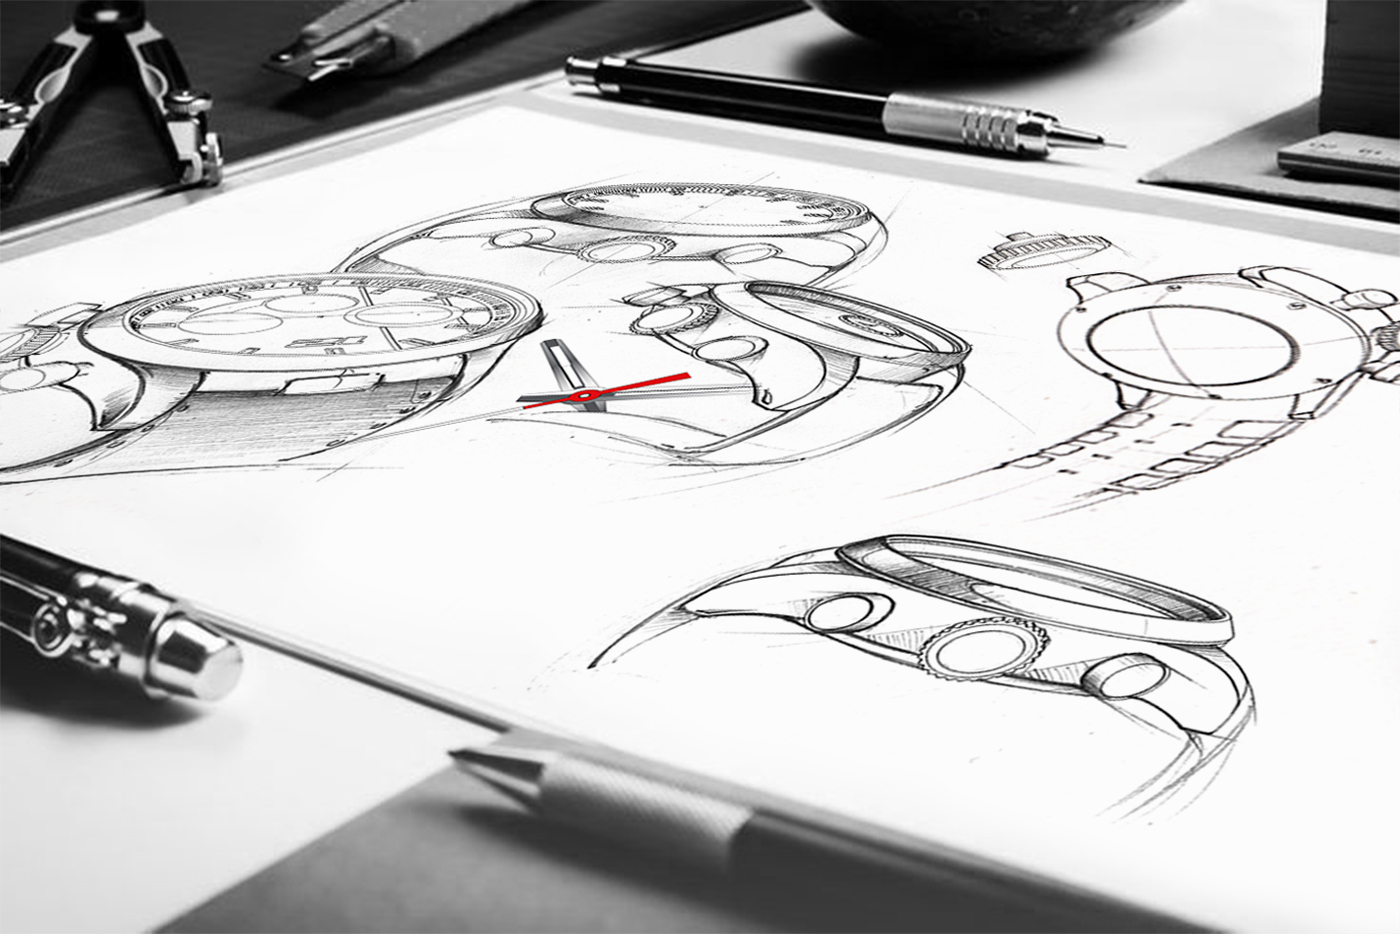 ovao Menswear timepiece Italy design sketches luxury brand Watches Drawing 